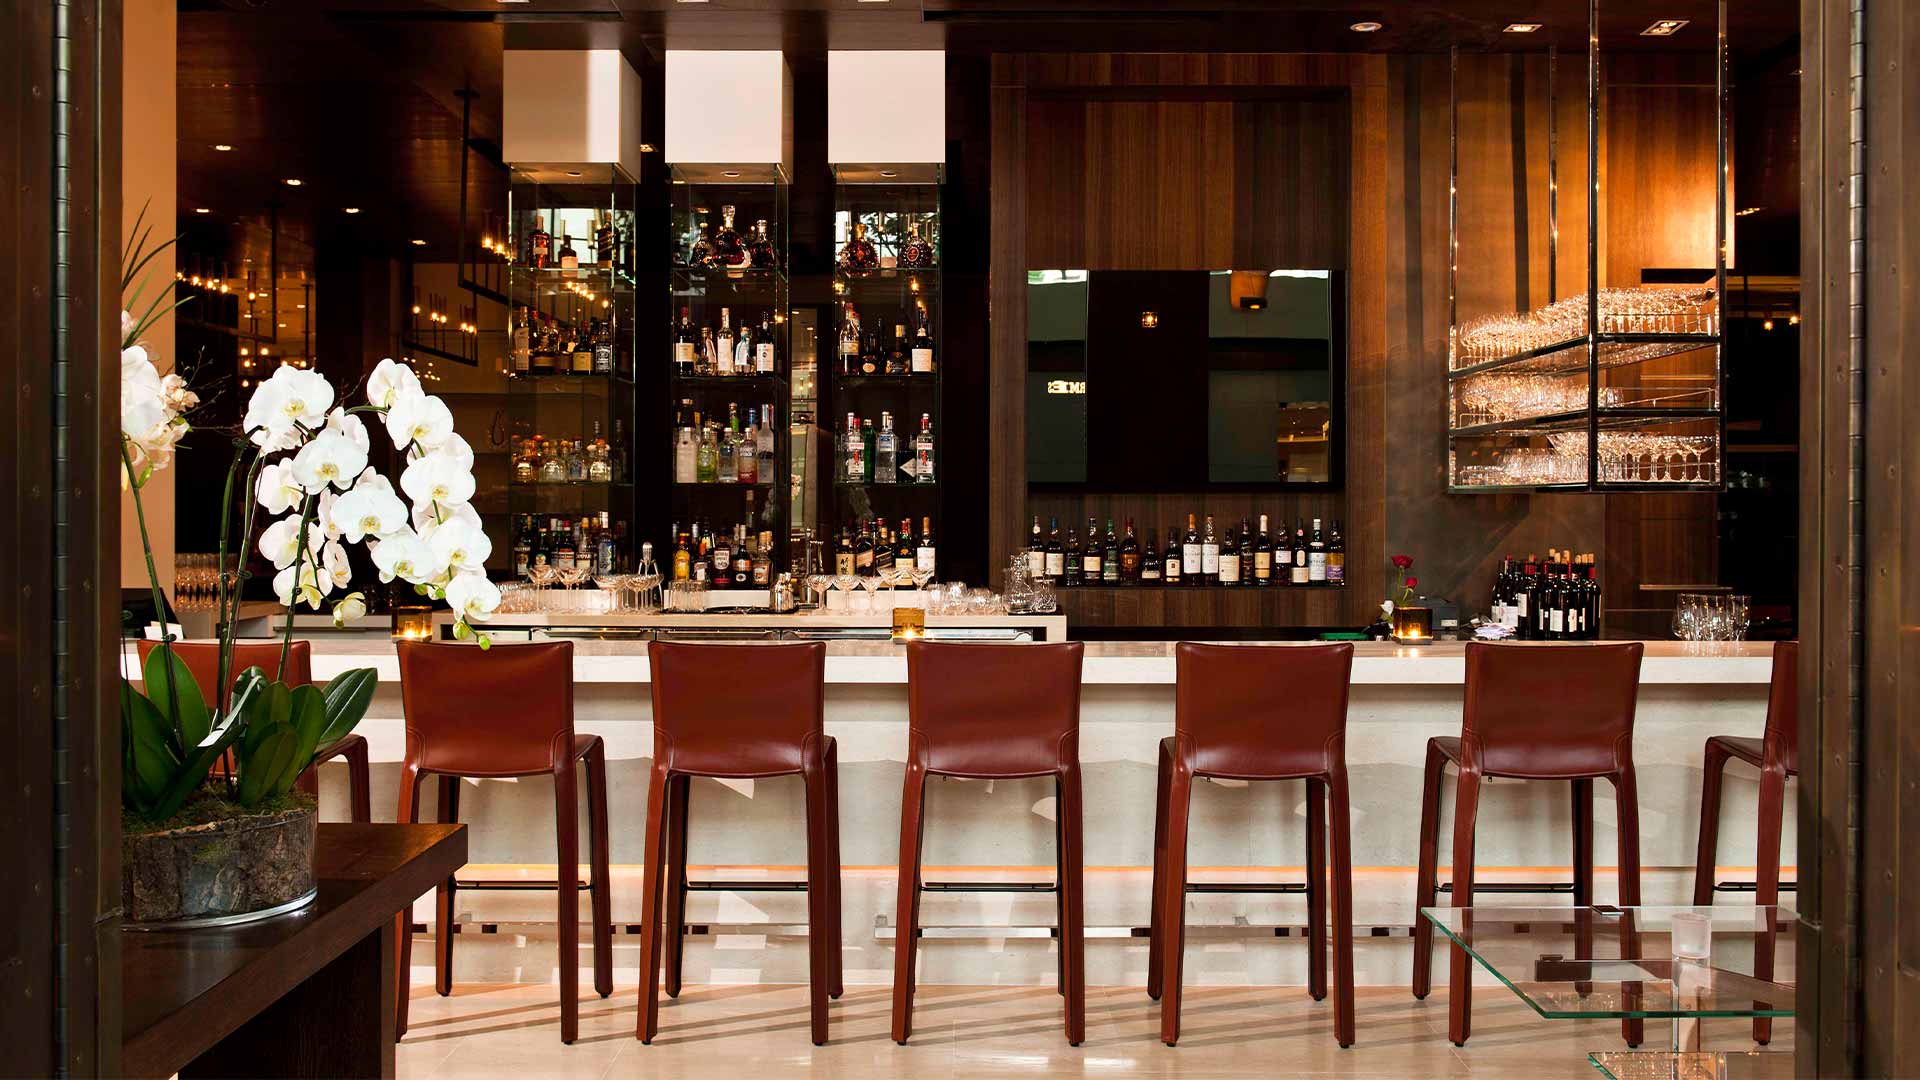 Entrance and bar seats at CUT Singapore, where private events are held